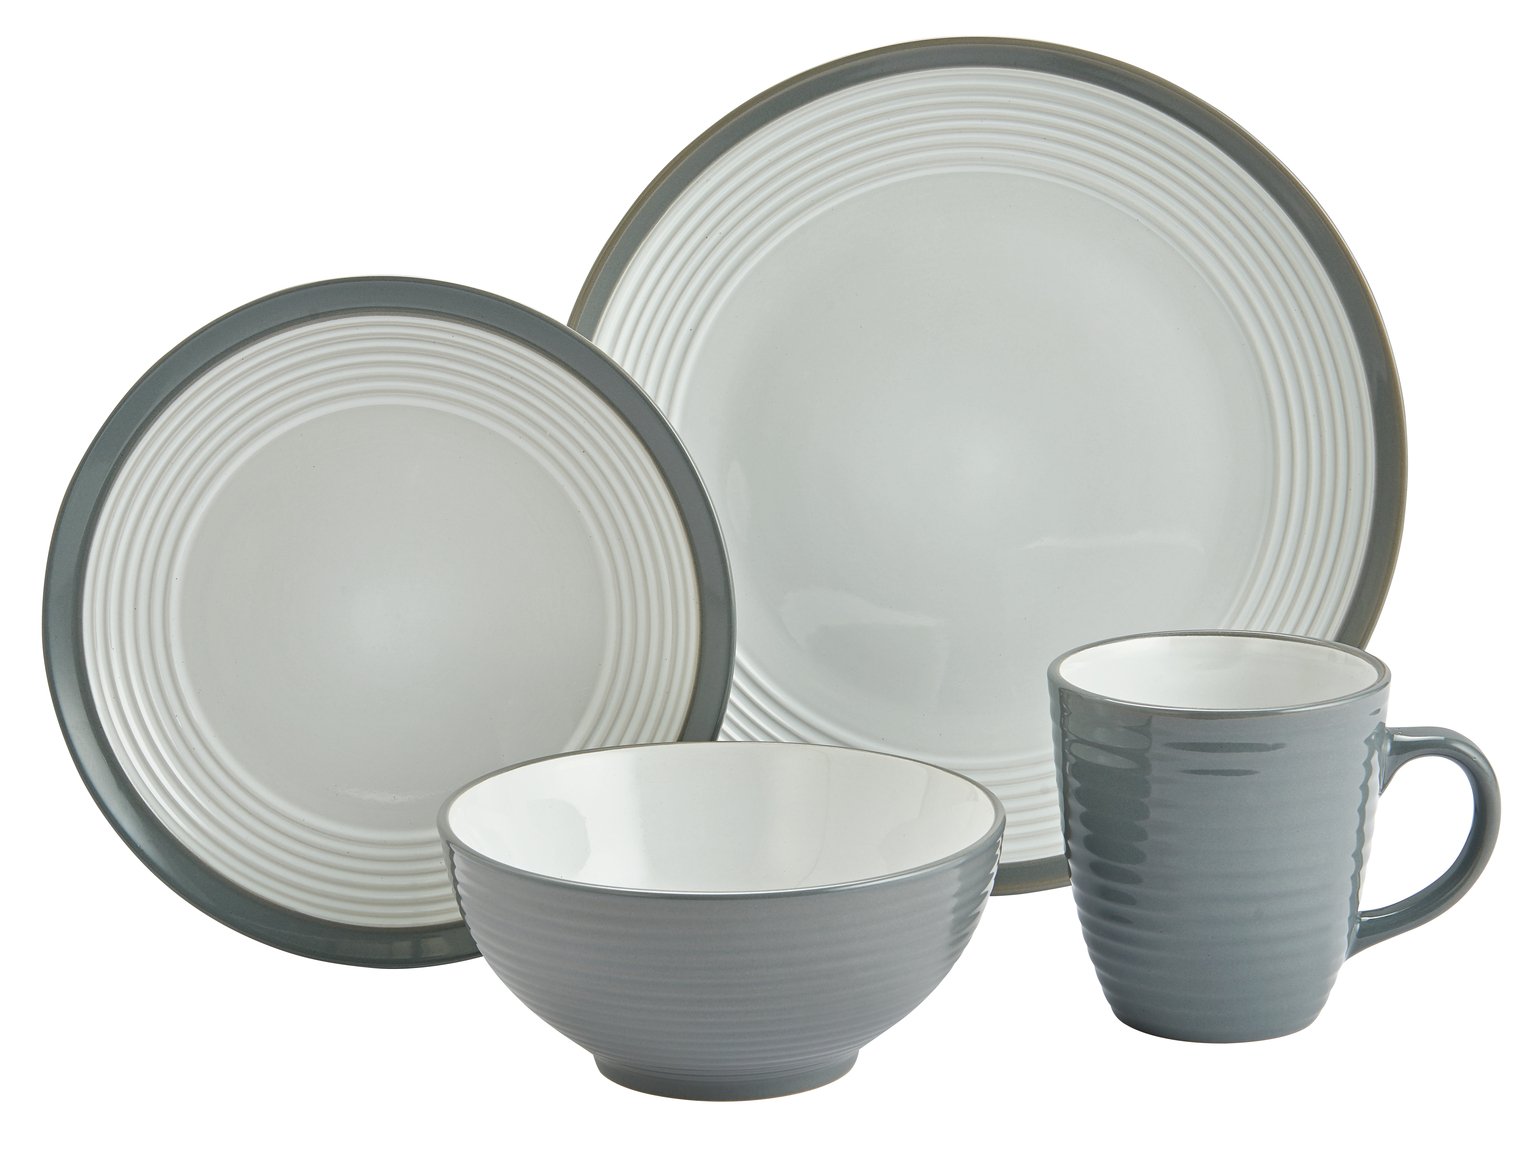 best place to buy dinner sets